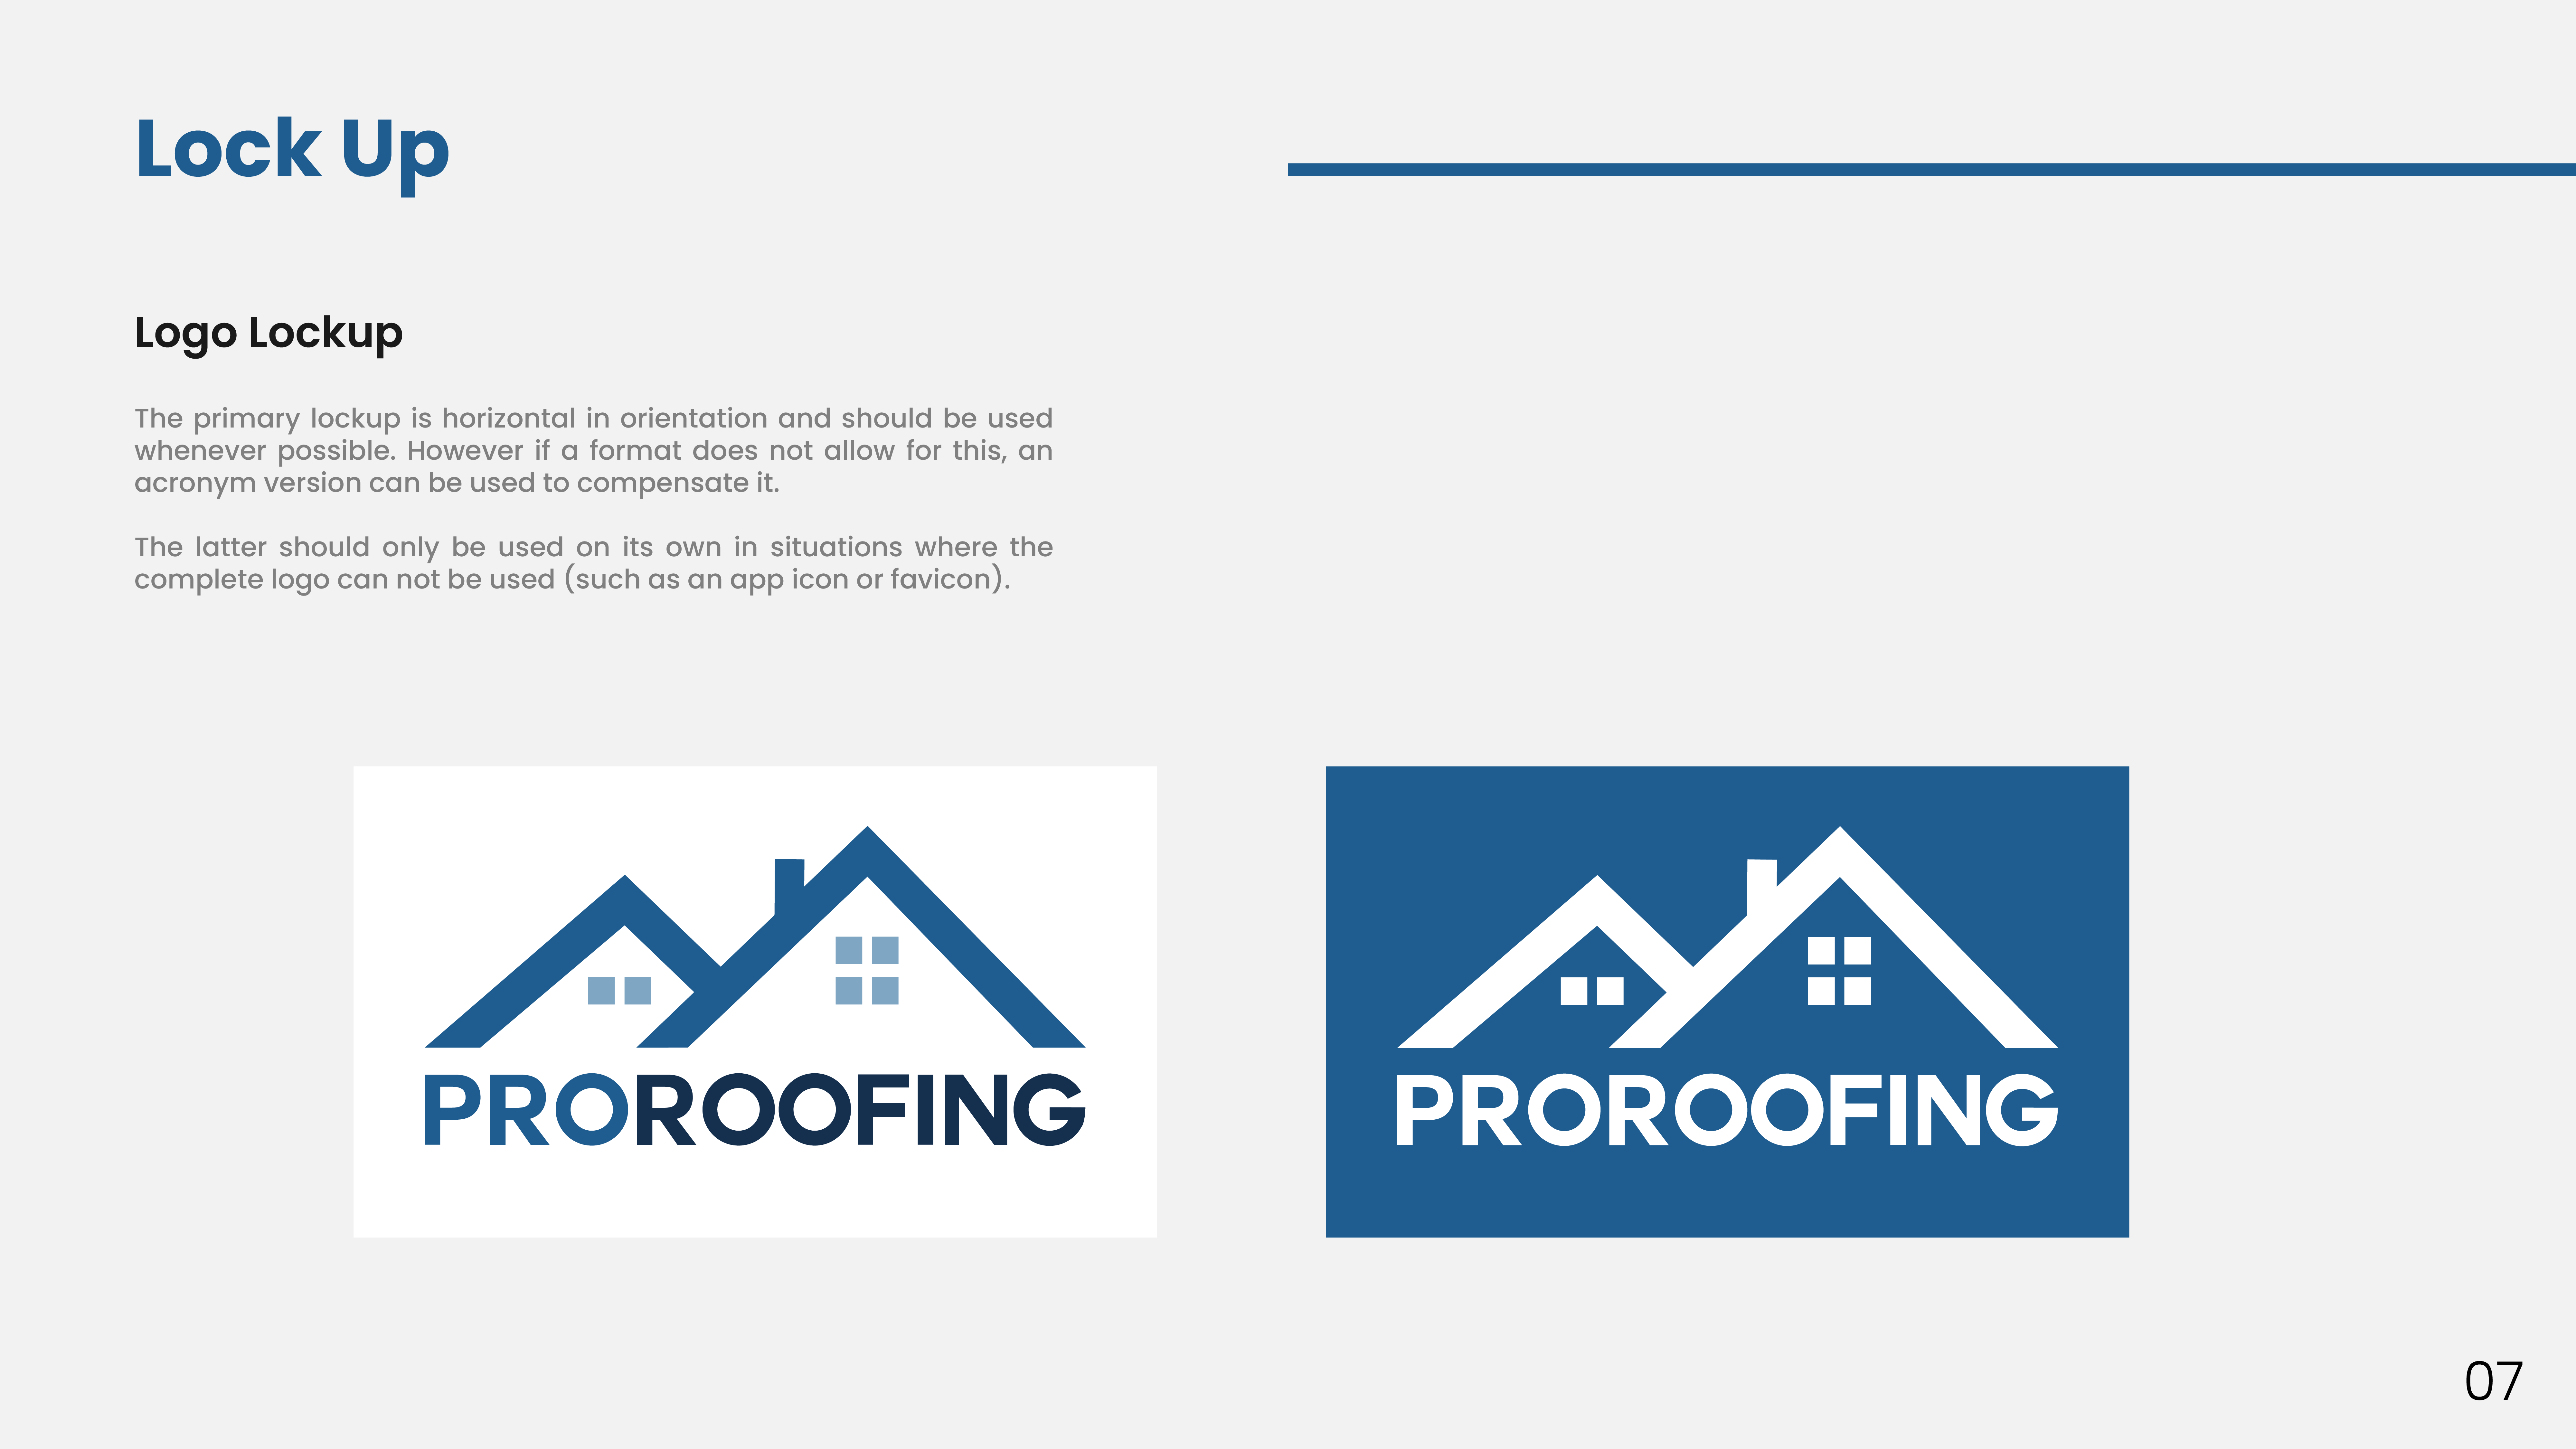 Pro Roofing - Pro roofing Brand Guidelines 09 - New Minds Group